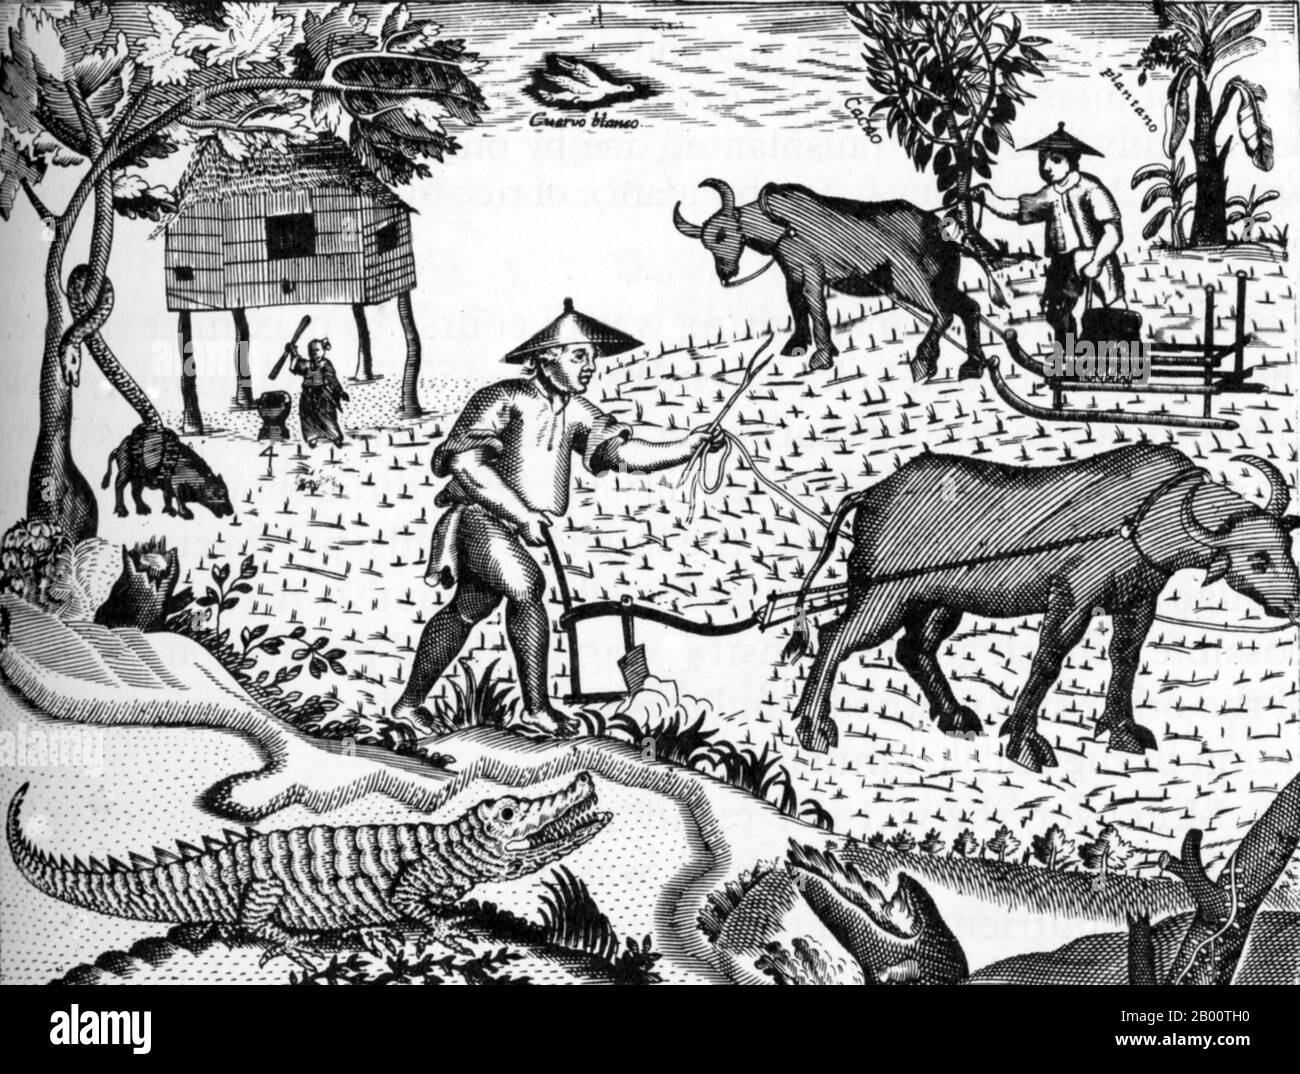 Philippines: Filipino farmers at work in a rice field. Illustration by Pedro Murillo Velarde (1696-1753), 1734.  This illustration first appeared on a map of the Philippines by Spanish missionary Pedro Murillo Velarde. It shows farmers operating rudimentary ox-drawn ploughs while a woman husks rice under a hut.  From 1565 to 1821, the Philippines was governed as a territory of the Viceroyalty of New Spain and then was administered directly from Madrid after the Mexican War of Independence. The galleons linking Manila to Acapulco traveled once or twice a year between the 16th to 19th centuries. Stock Photo